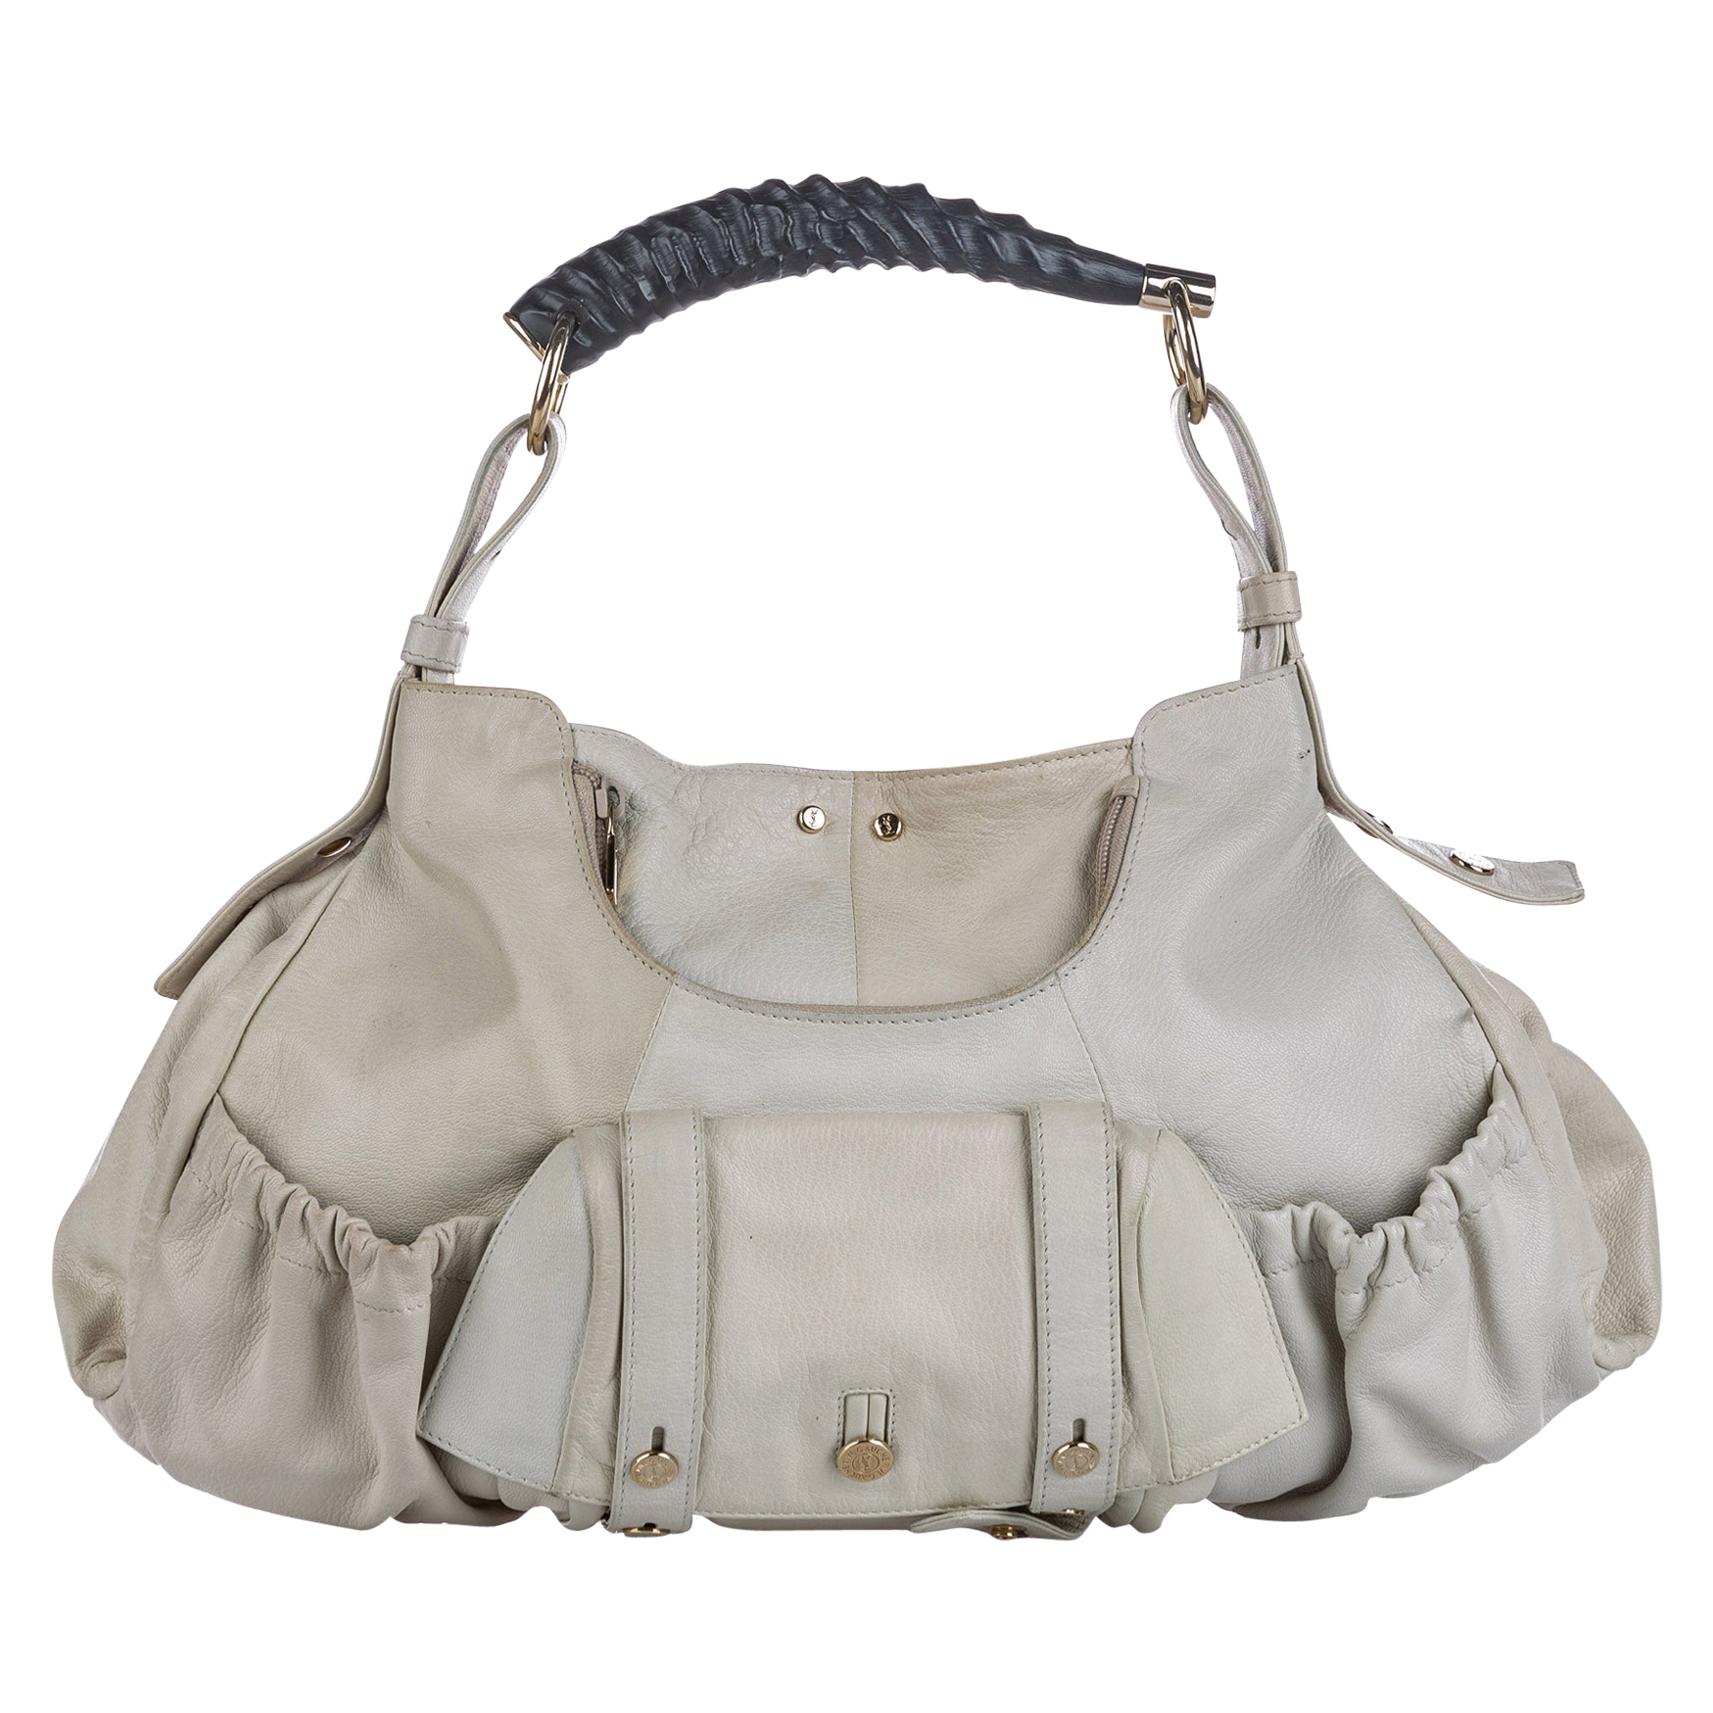 Vintage Authentic YSL White Leather Mombasa Shoulder Bag ITALY LARGE  For Sale